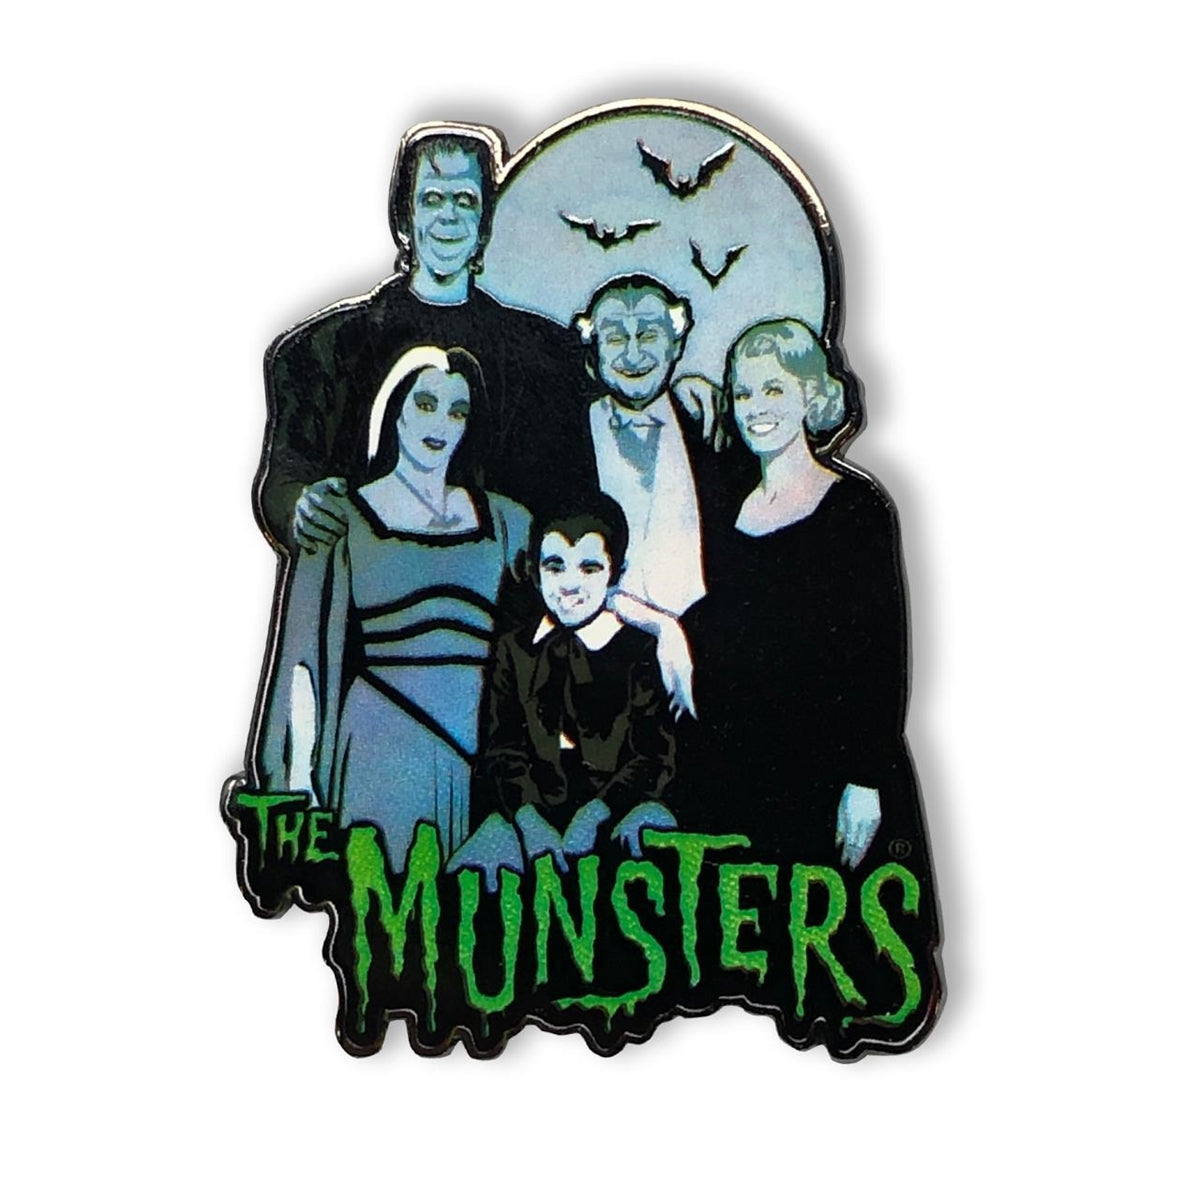 "The Munsters Family" enameled metal 1 5/8" x 2 1/4" clutch back pin, featuring the cast of the campy 60s TV show posing together in front of a full moon